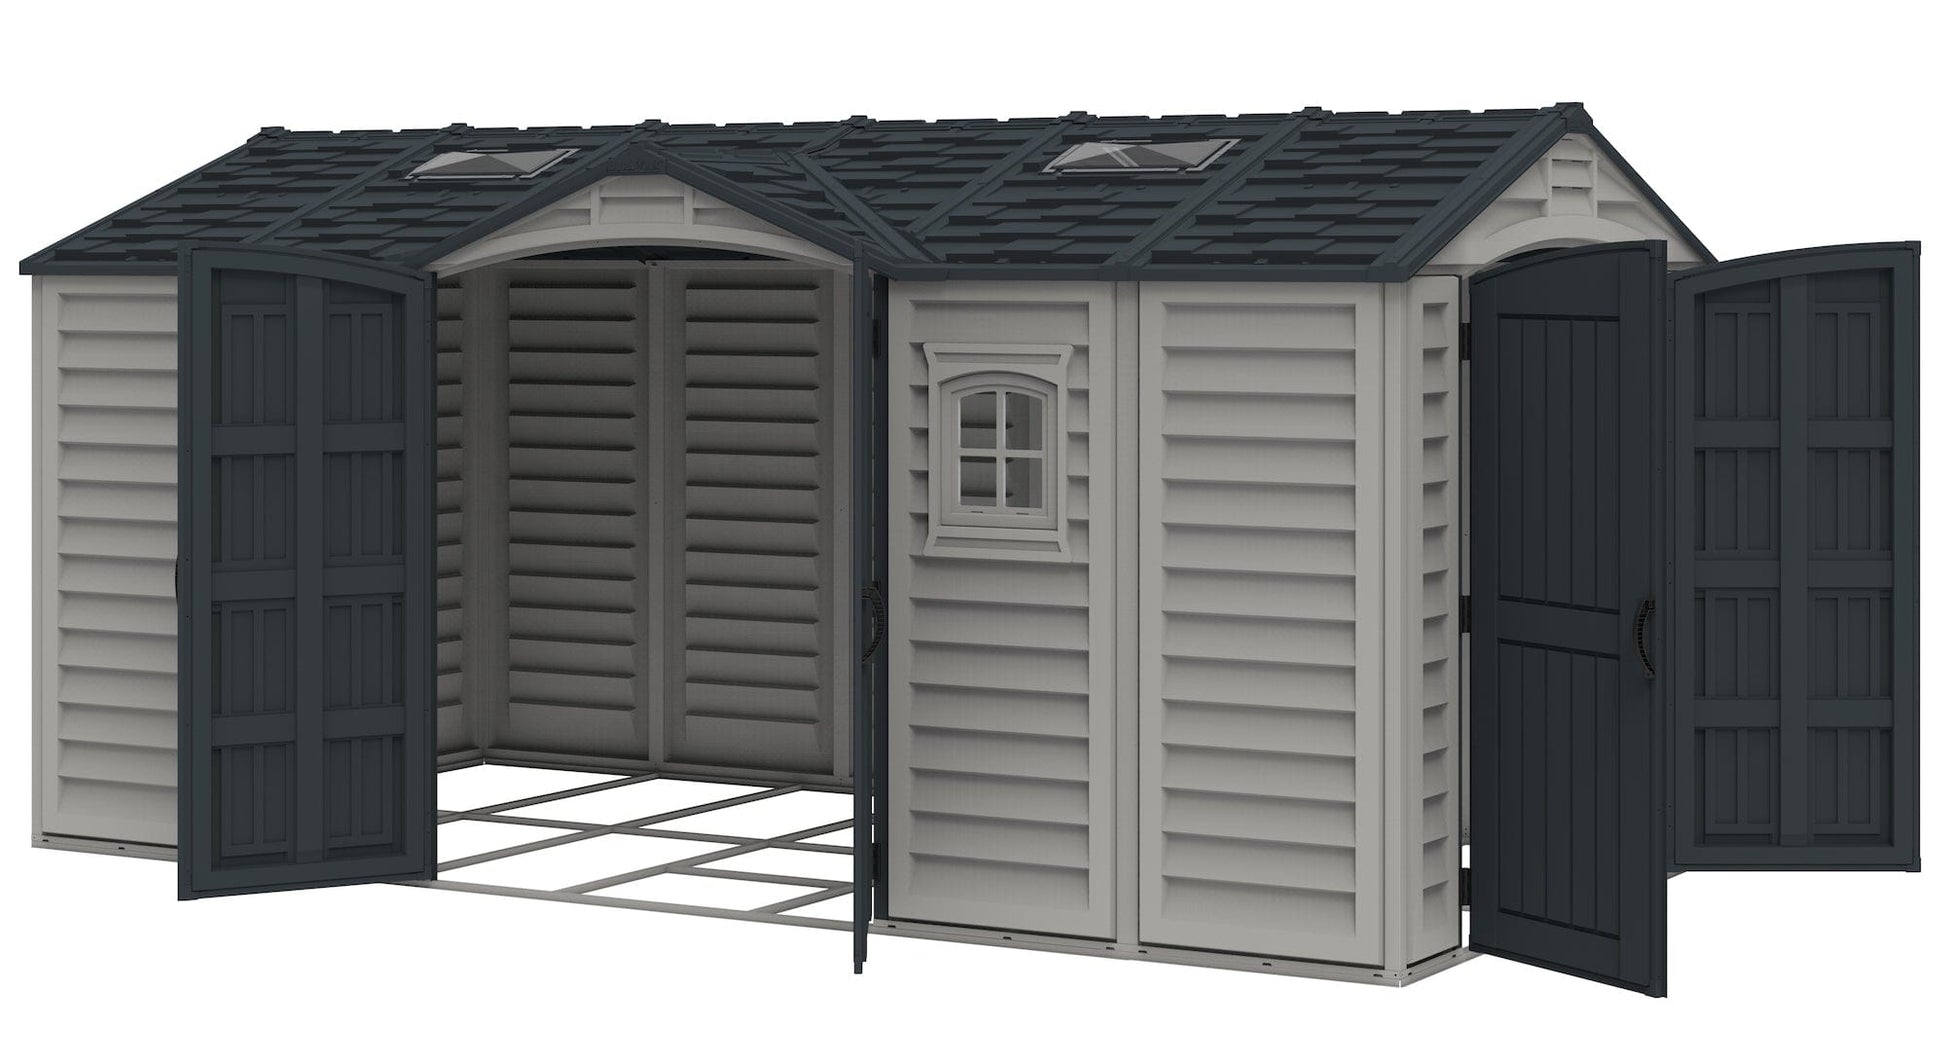 DuraMax Vinyl Shed 15 x 8 Apex Pro with Foundation Kit